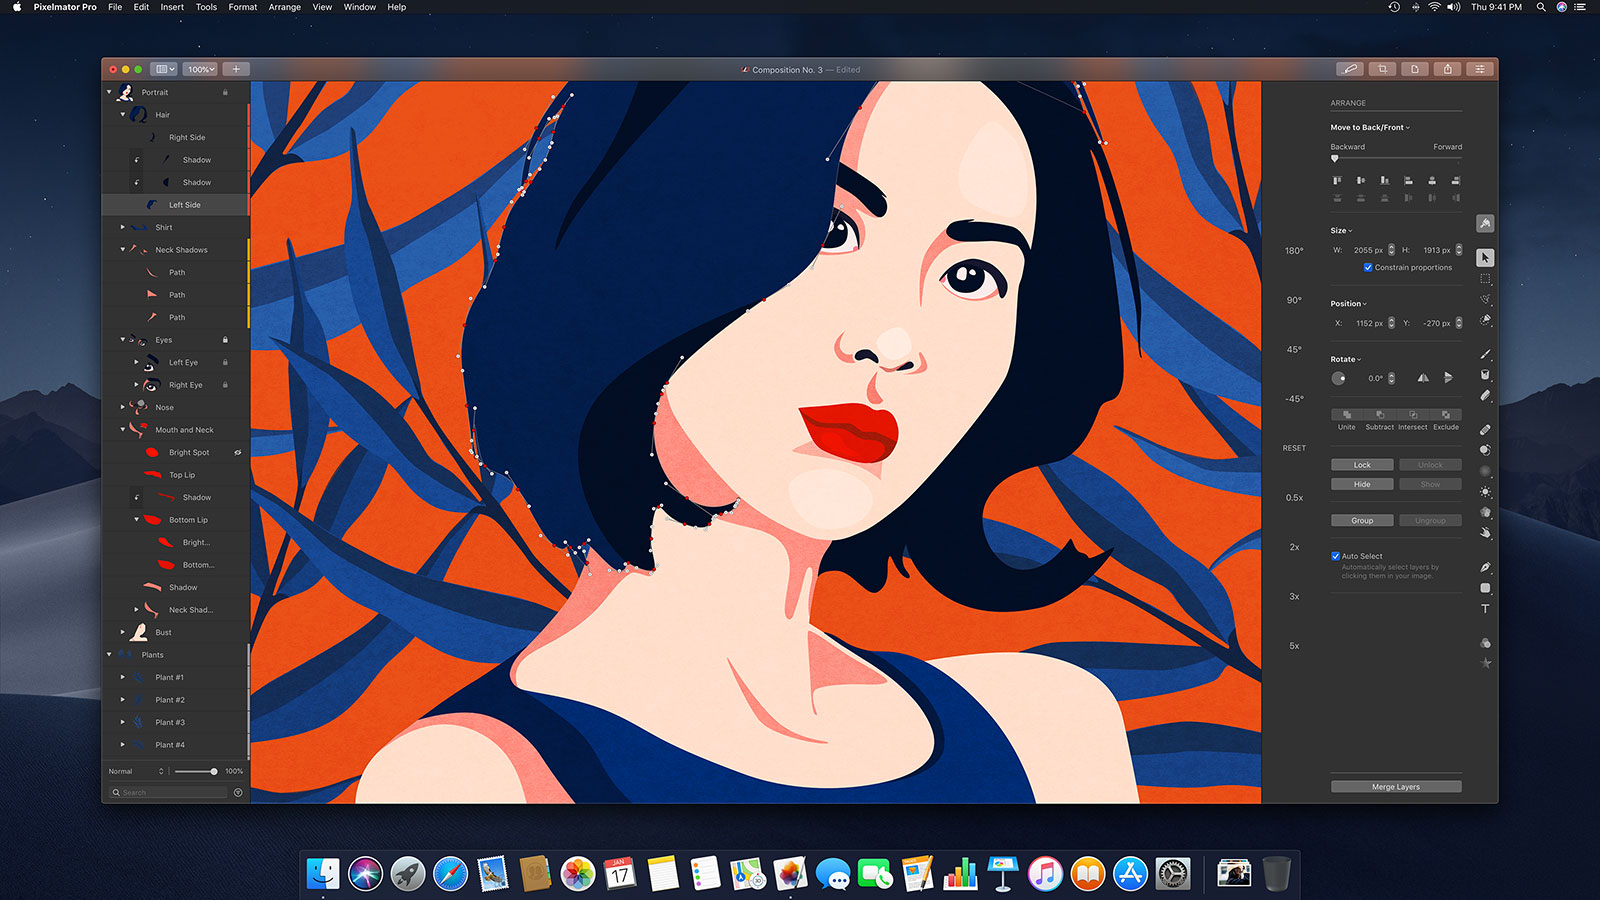 Pixelmator Pro gets feature that matches colors in two images; Lightroom, CleanMyMac X, and Facebook are updated